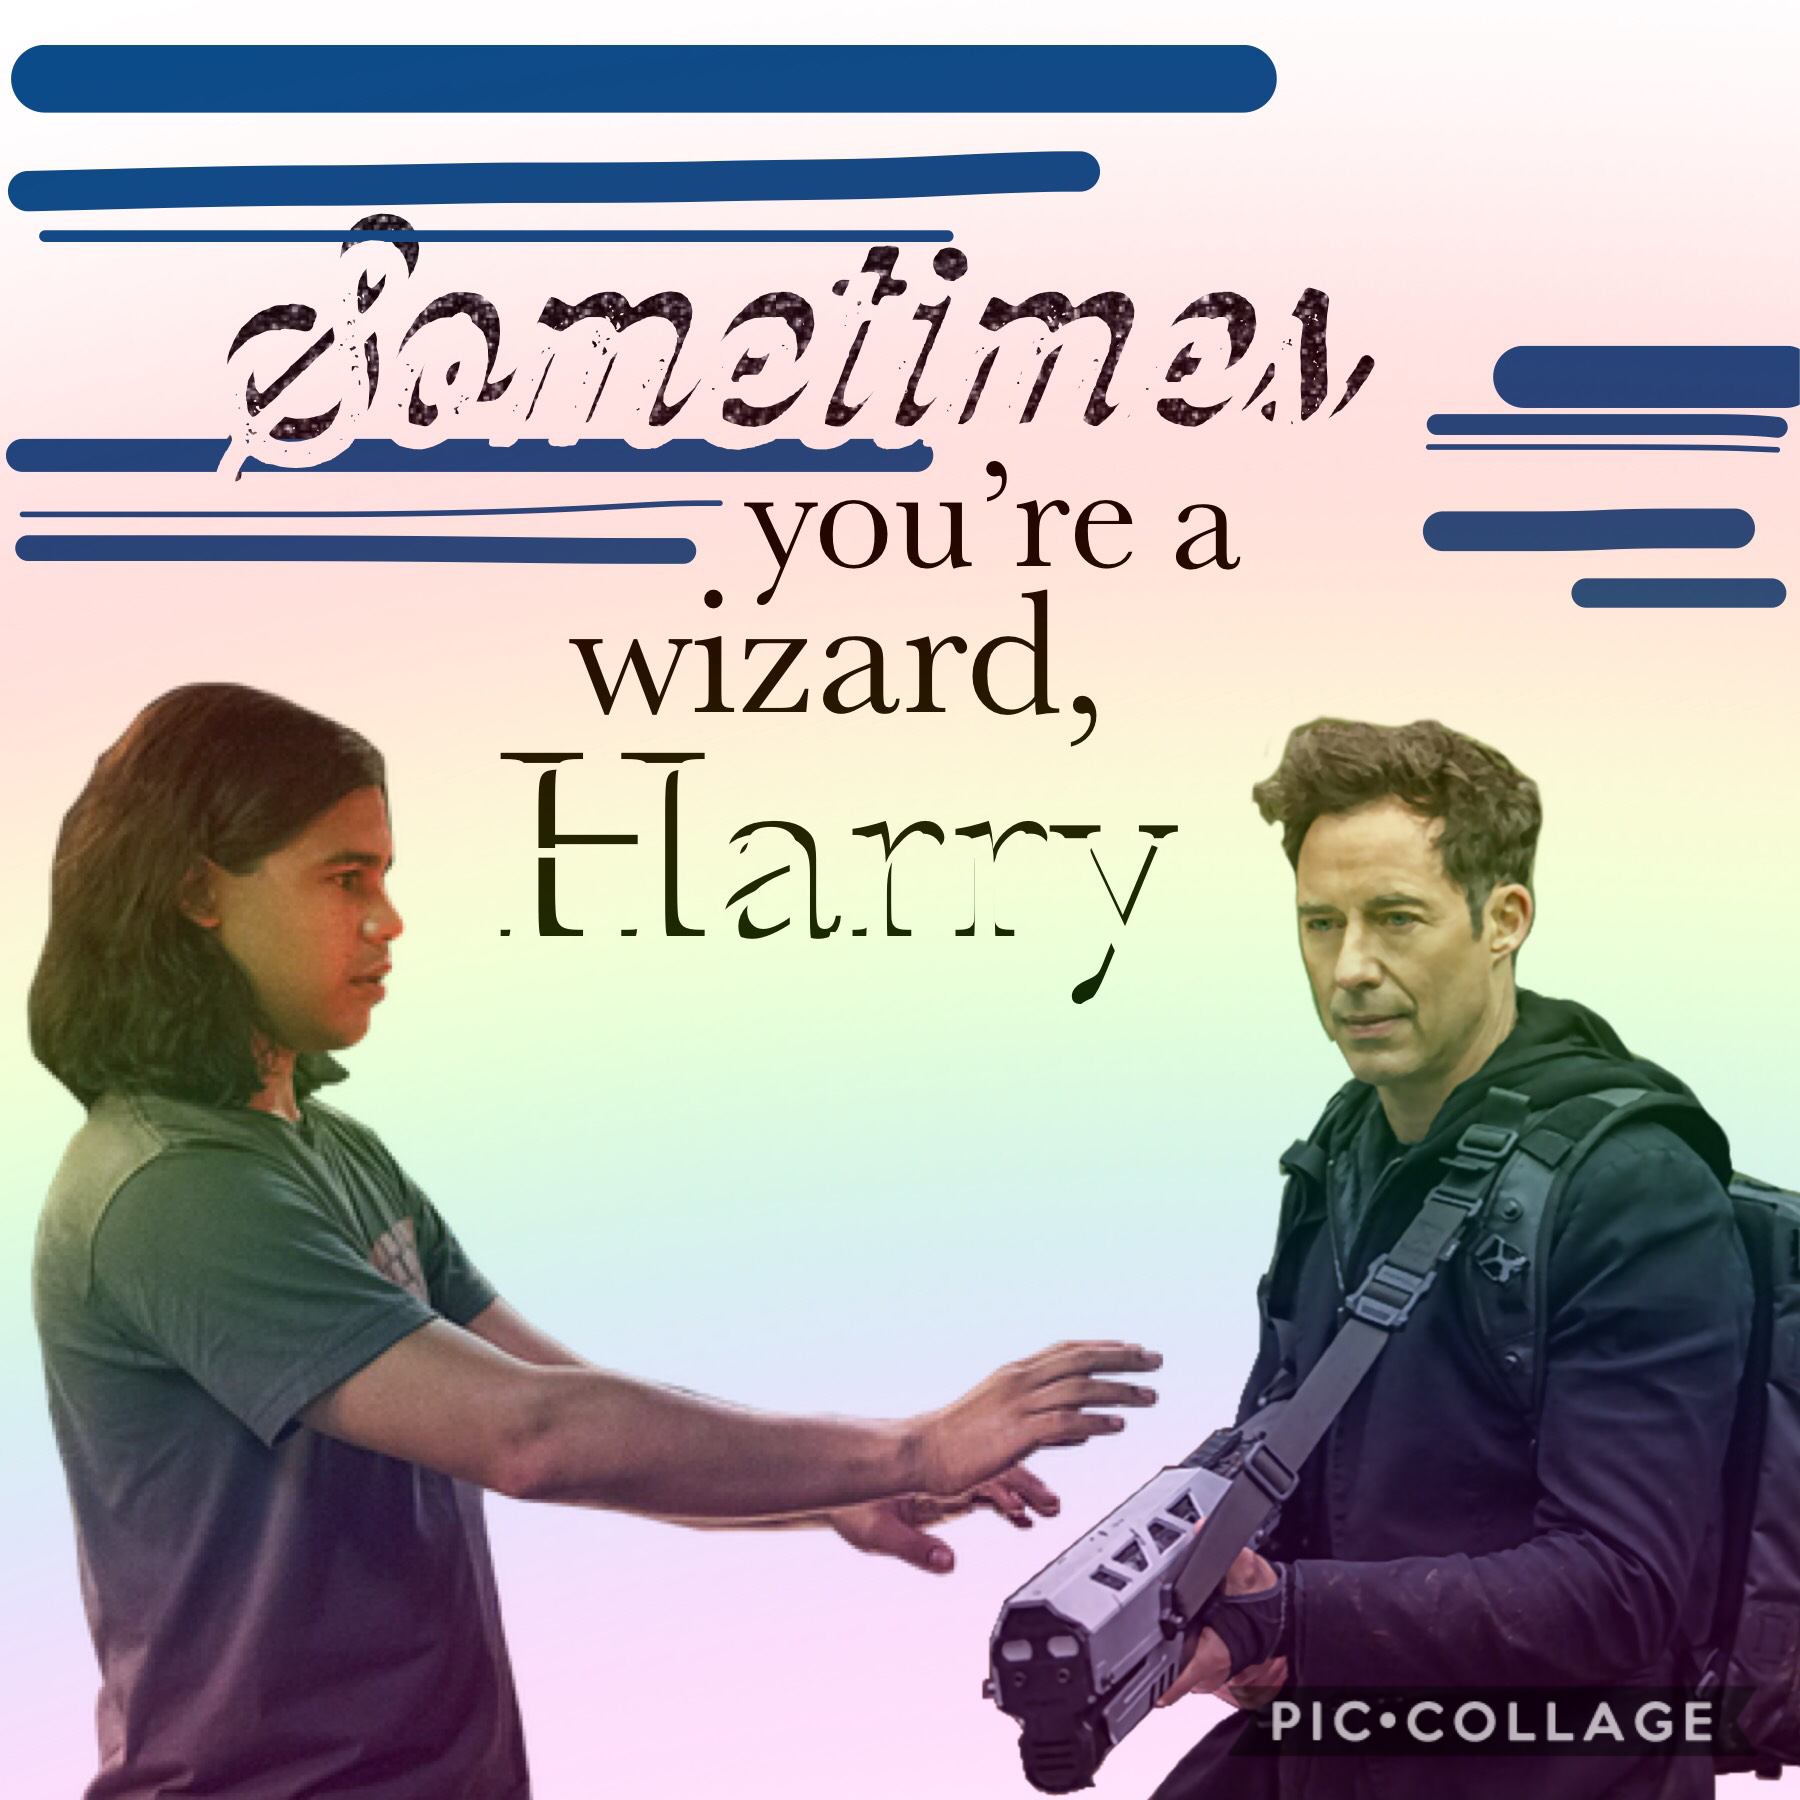 🌈Tap!!🌈
Ehh so this is kinda trash as usual but anyways I really wanted to use this quote cos it’s one of my favorite moments from the flash! I love both of them sm hahha 